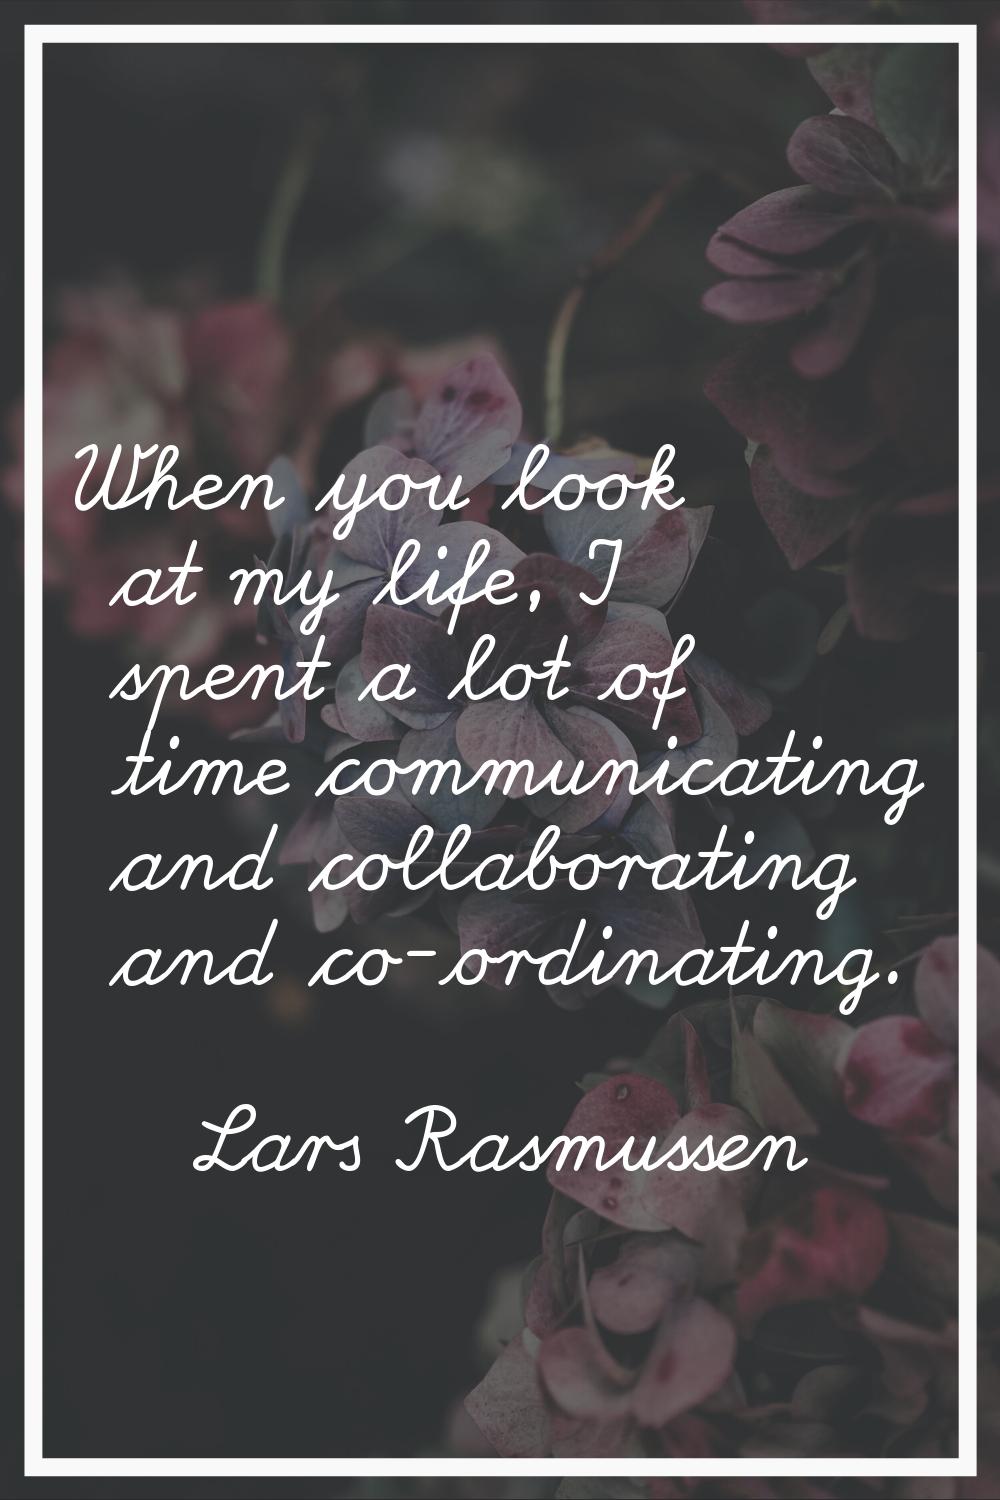 When you look at my life, I spent a lot of time communicating and collaborating and co-ordinating.